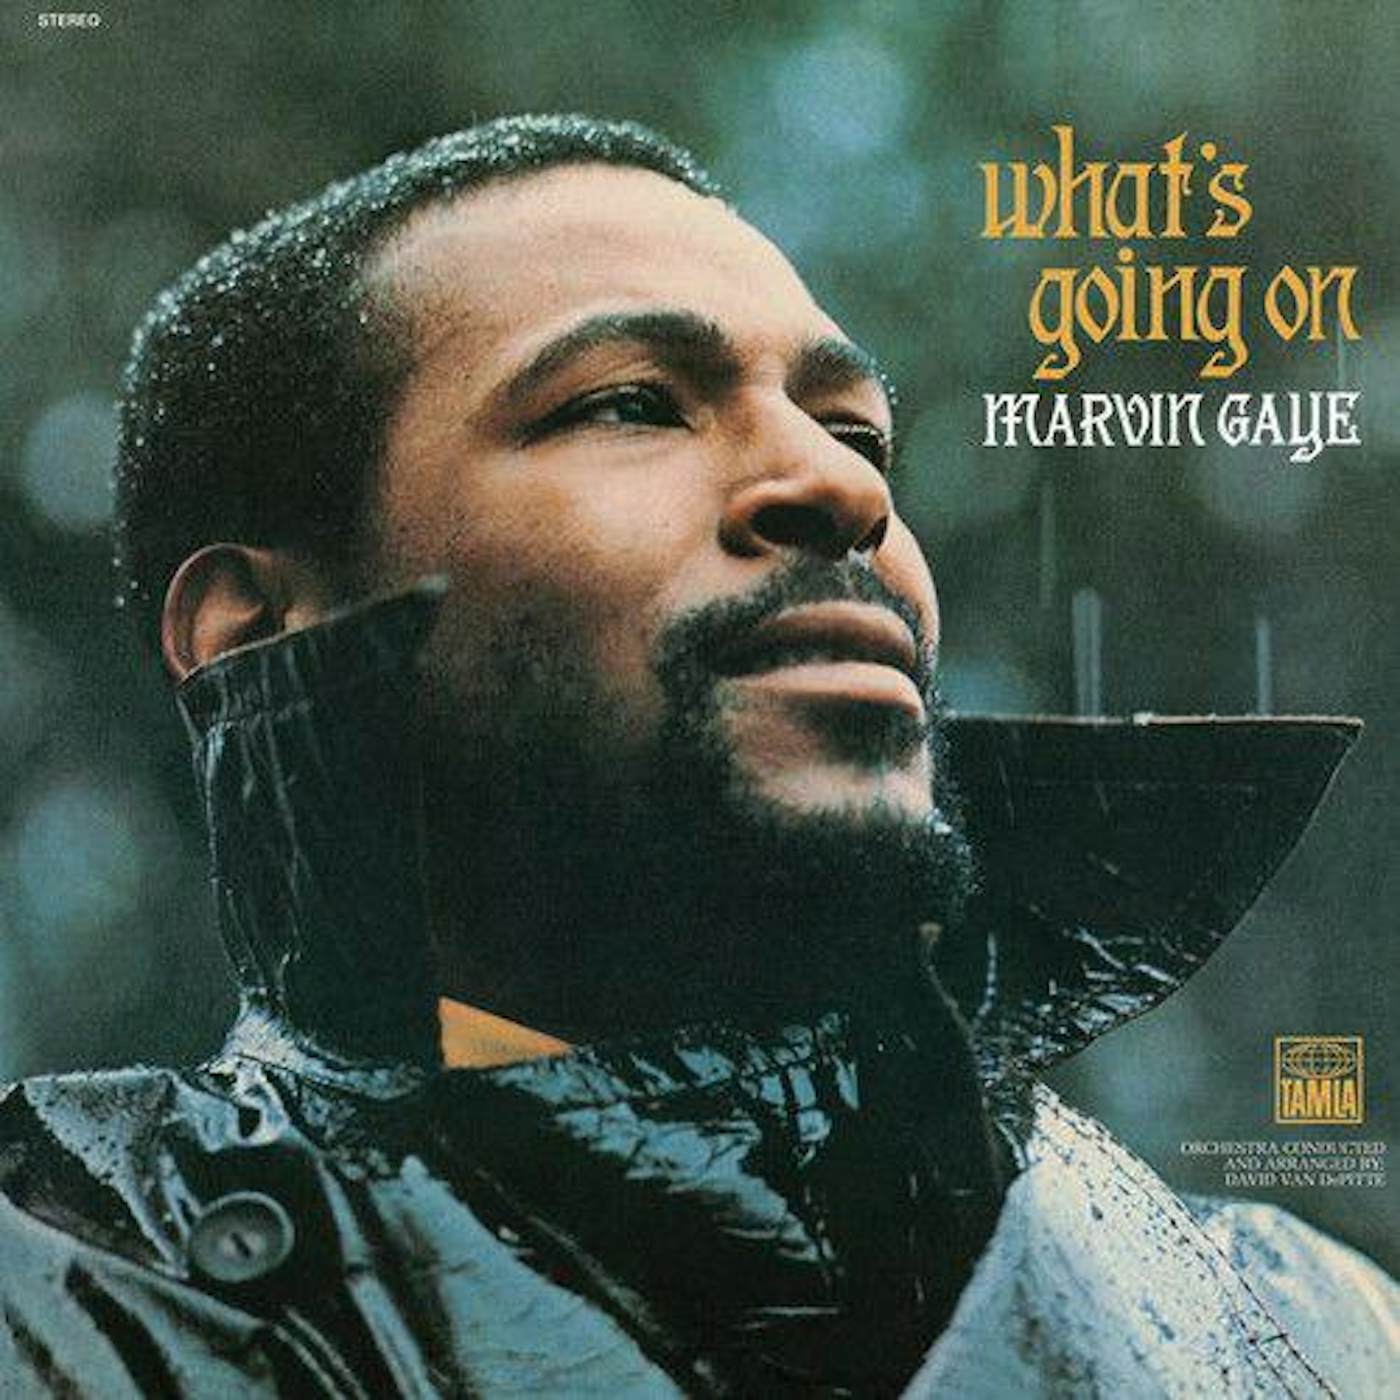 Marvin Gaye What's Going On (180g) Vinyl Record